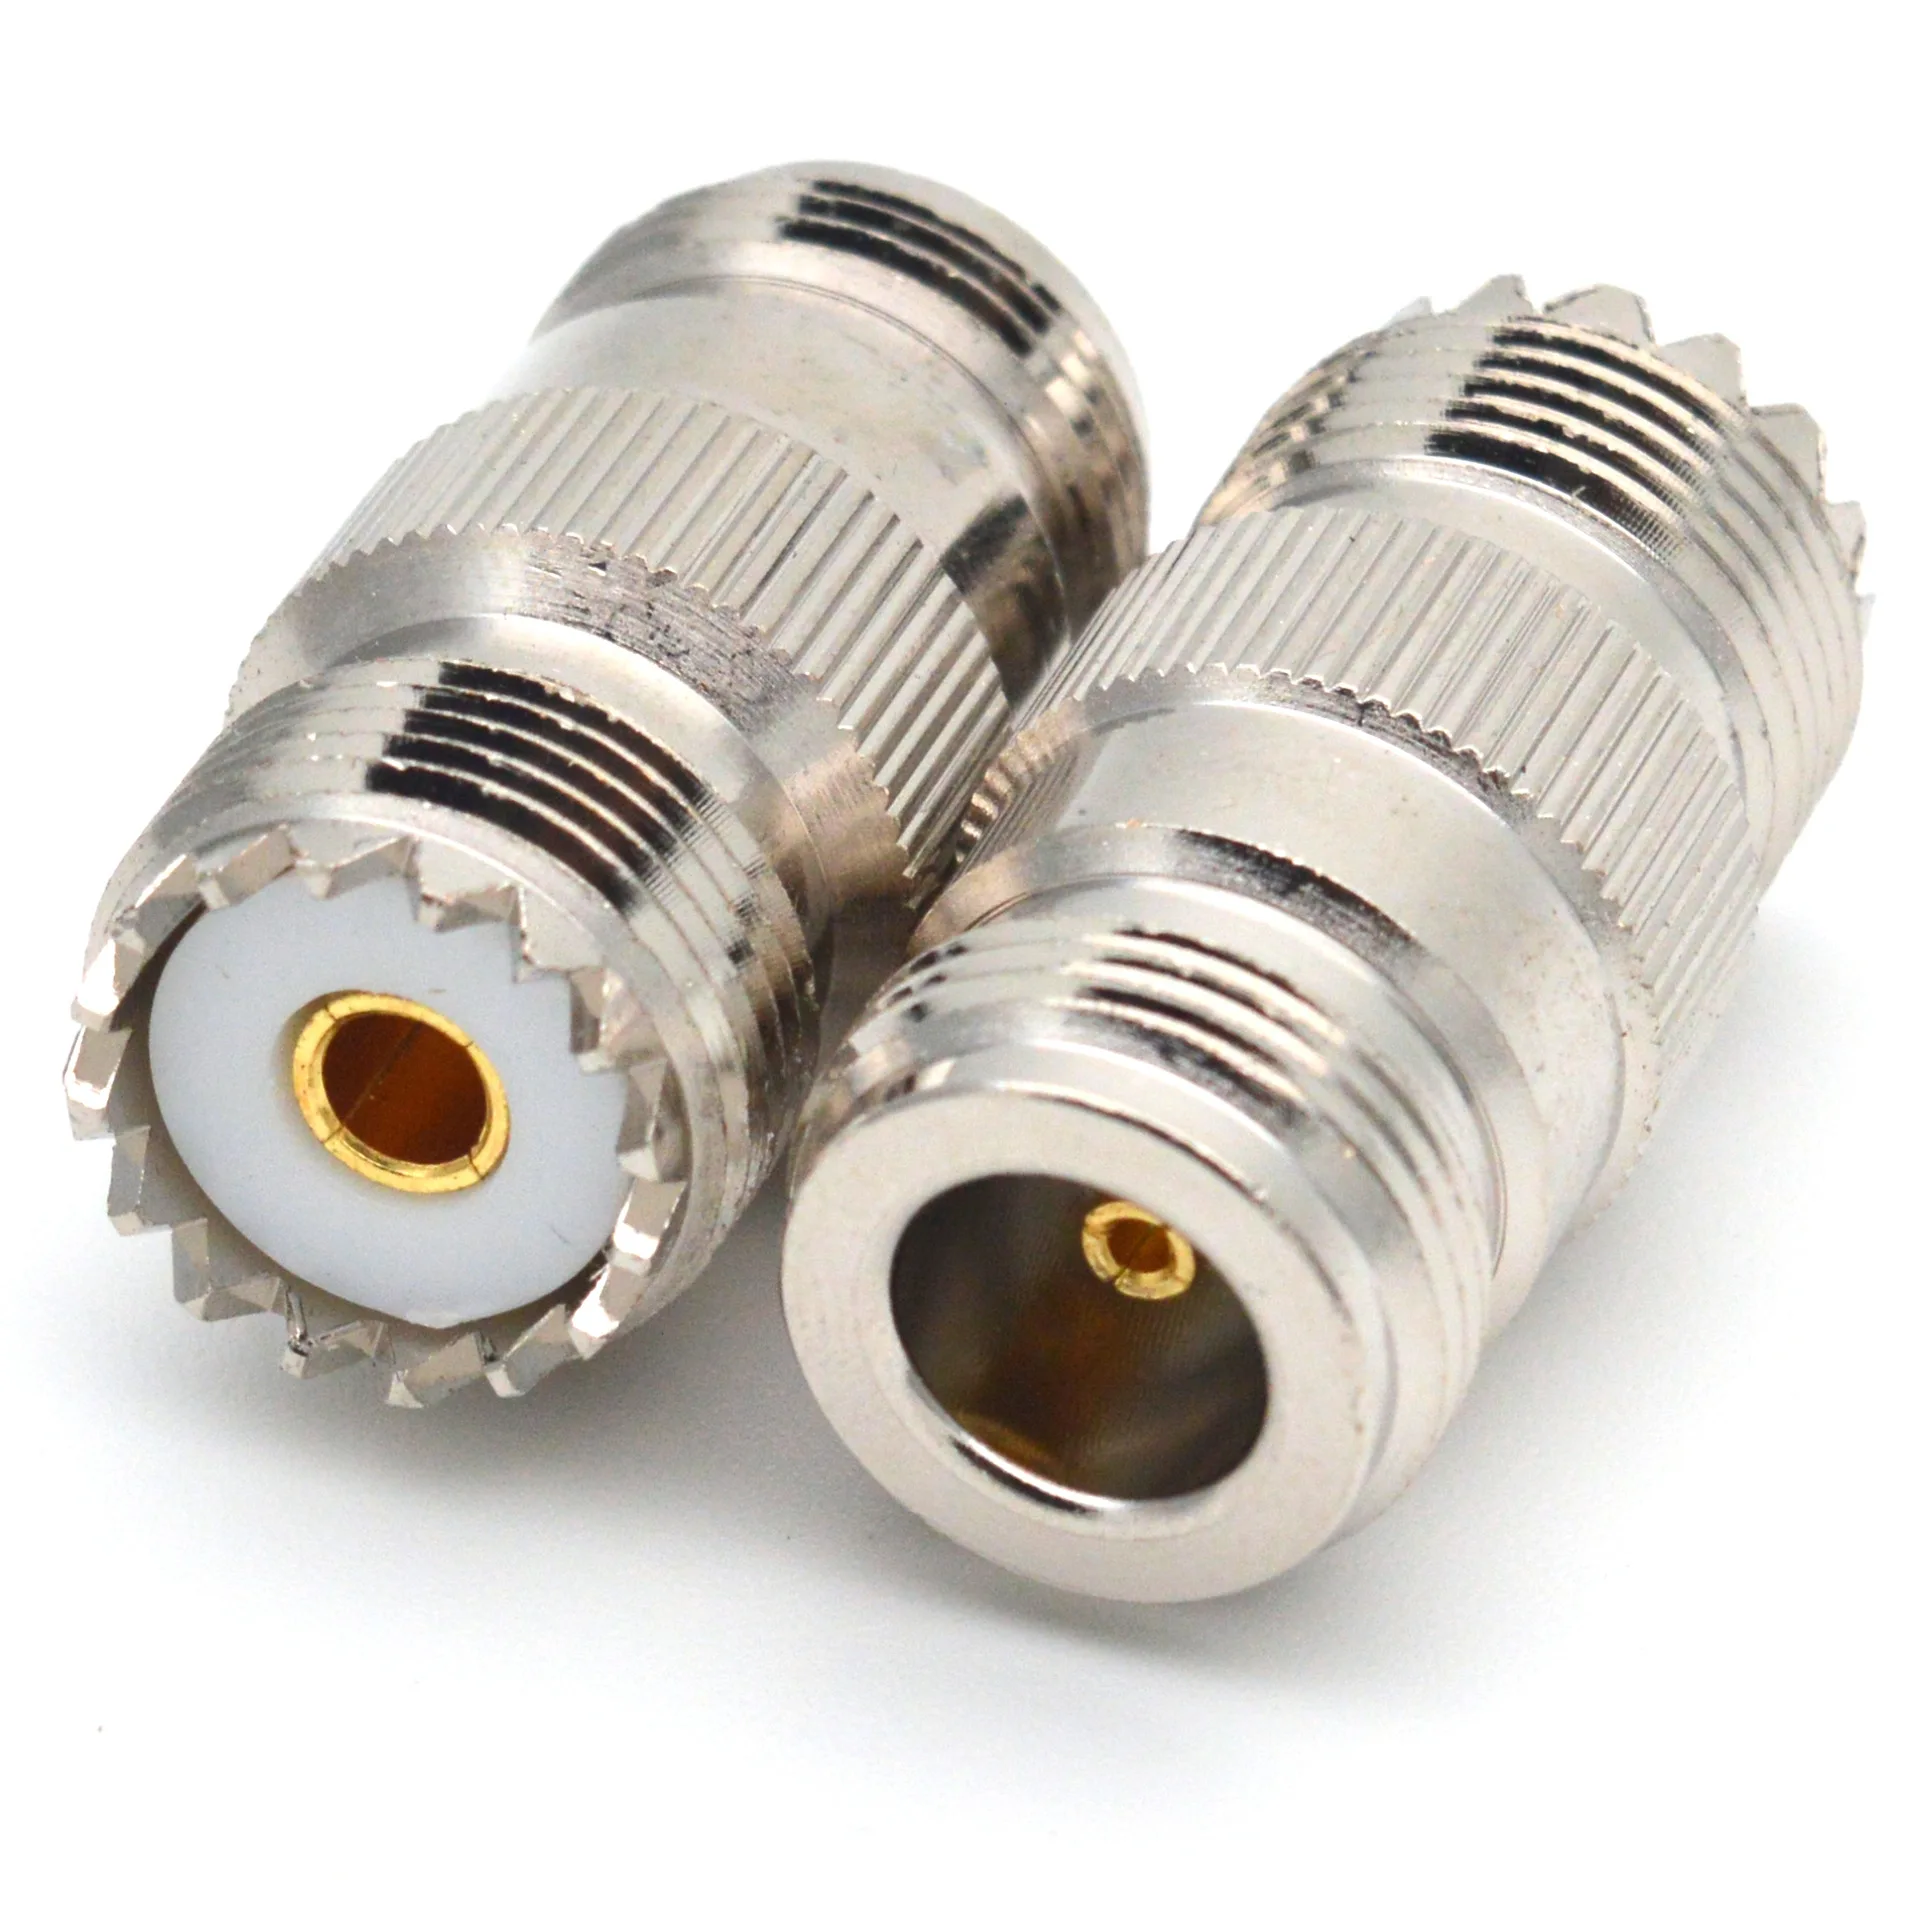 2pcs NK/UHFK coaxial high-frequency adapter All copper RF adapter N female to UHF female 50 ohm